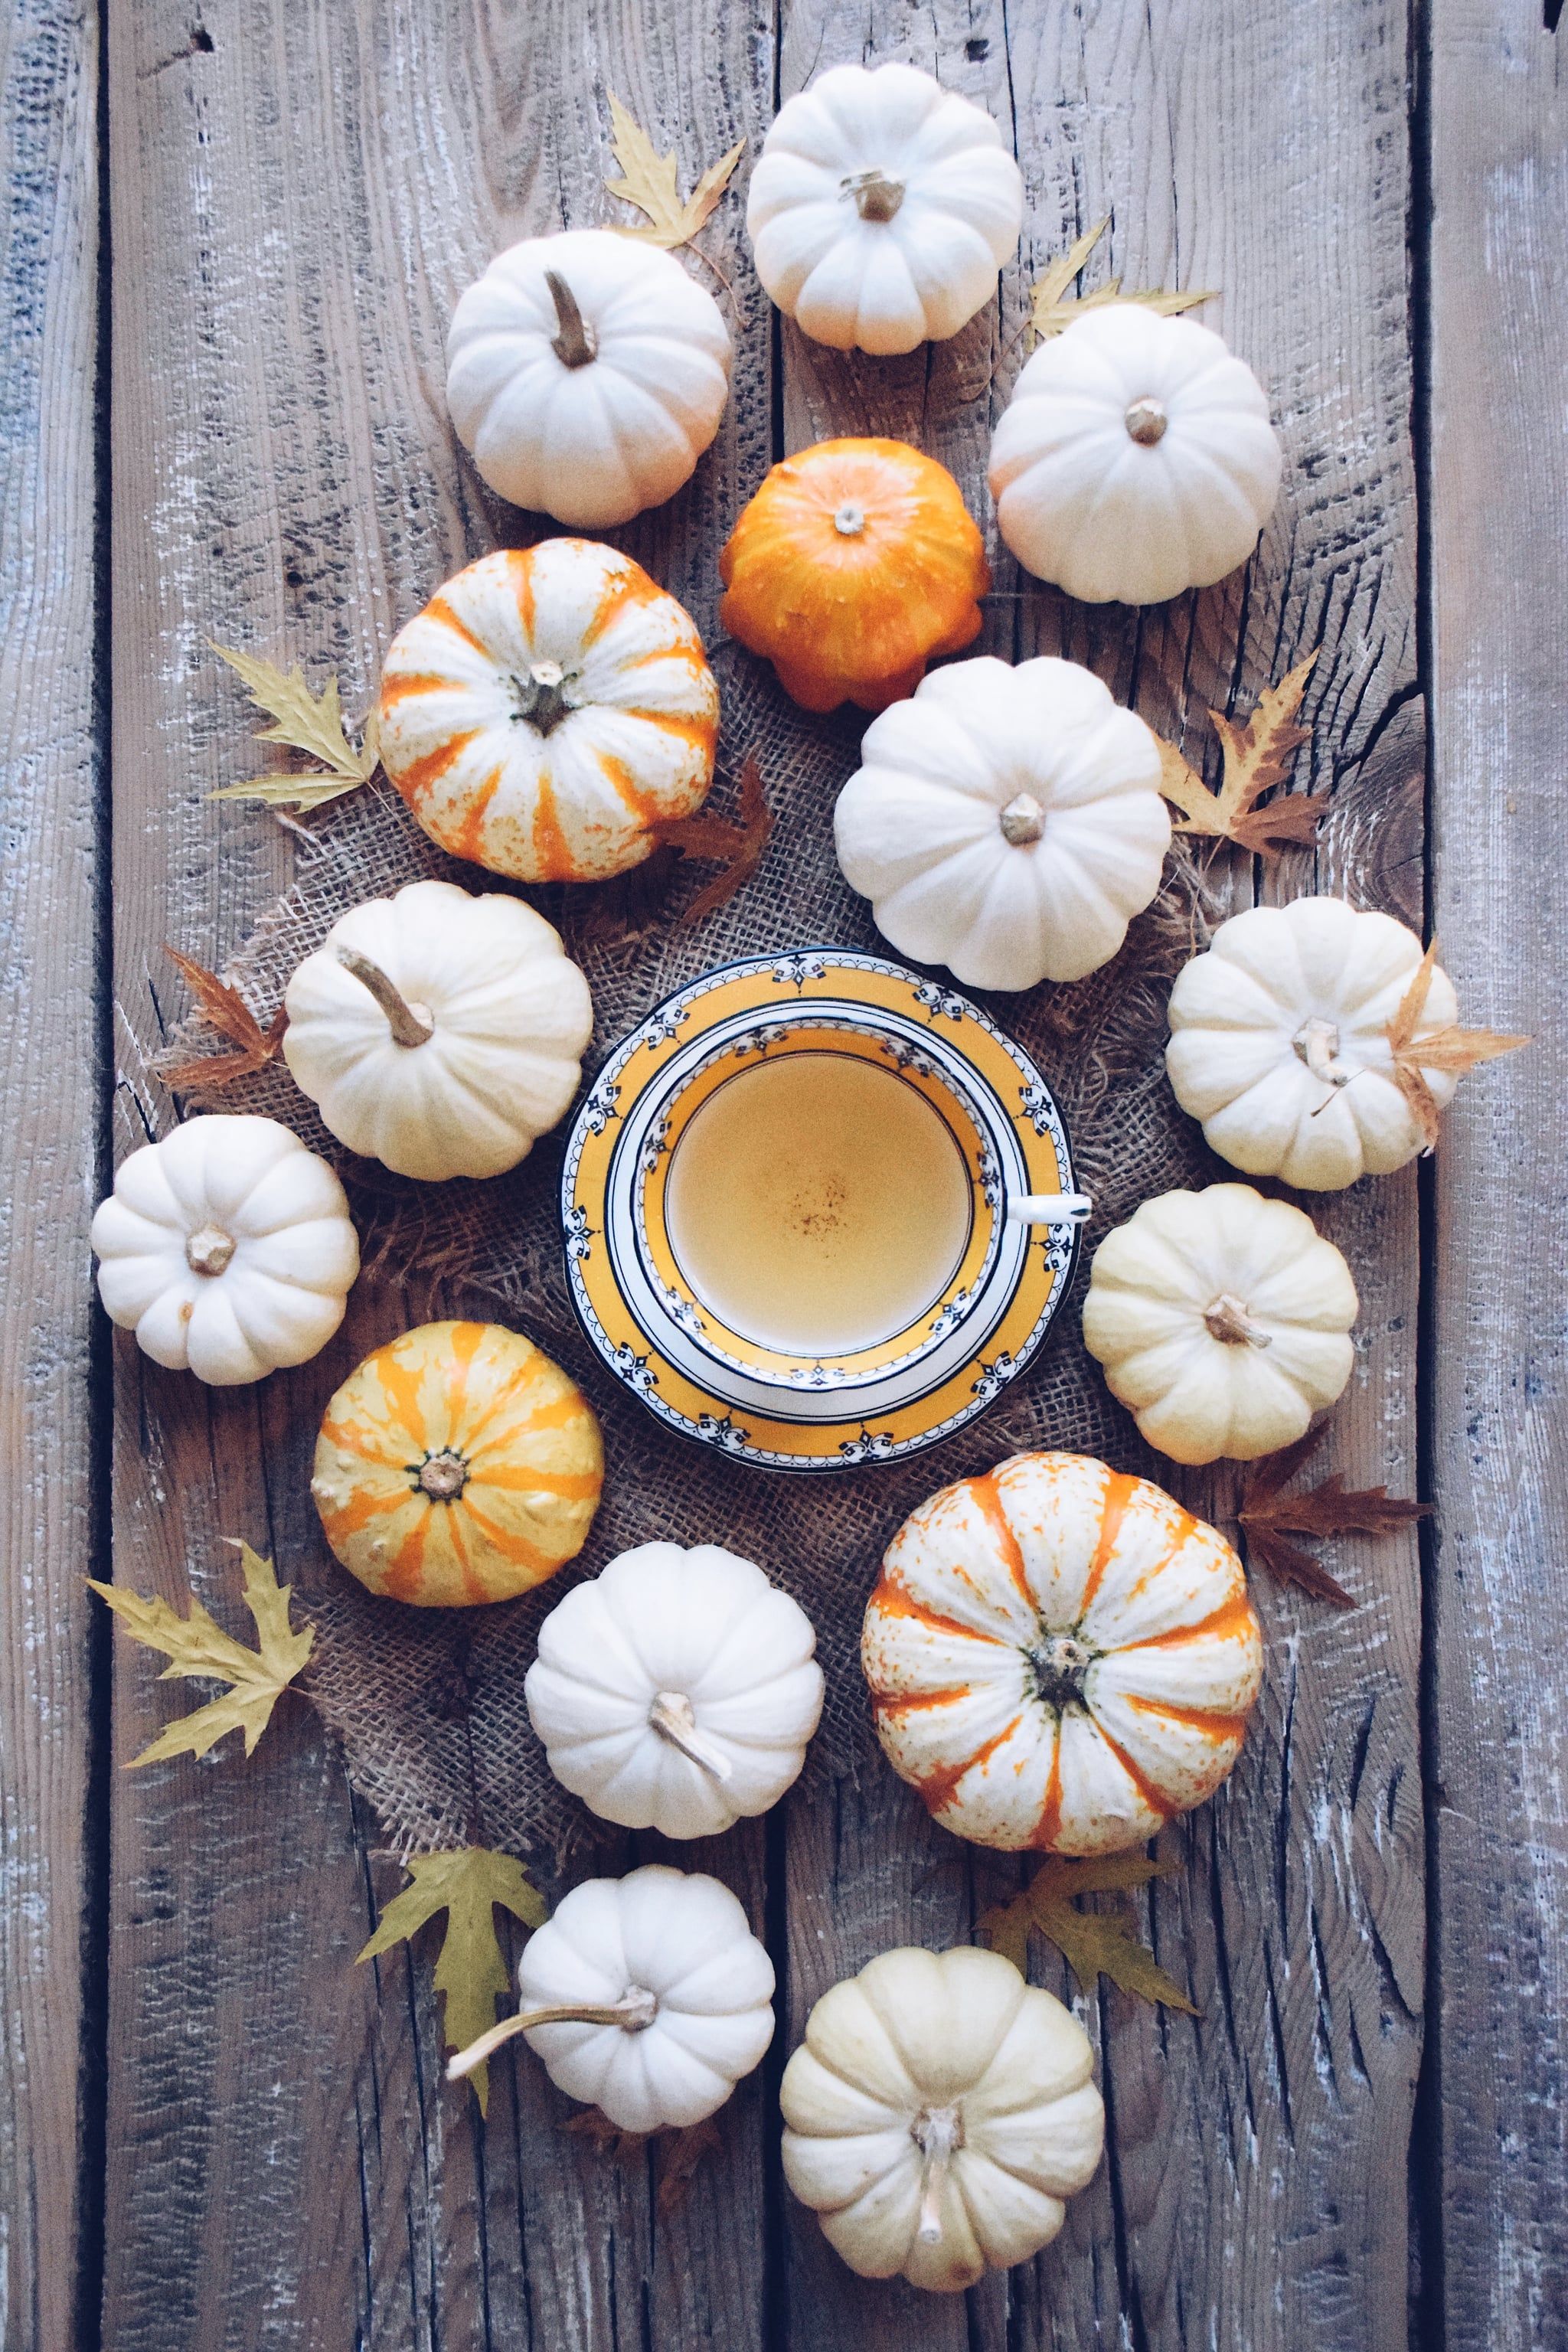 White and orange pumpkins on a wooden table with a cup of tea. - Pumpkin